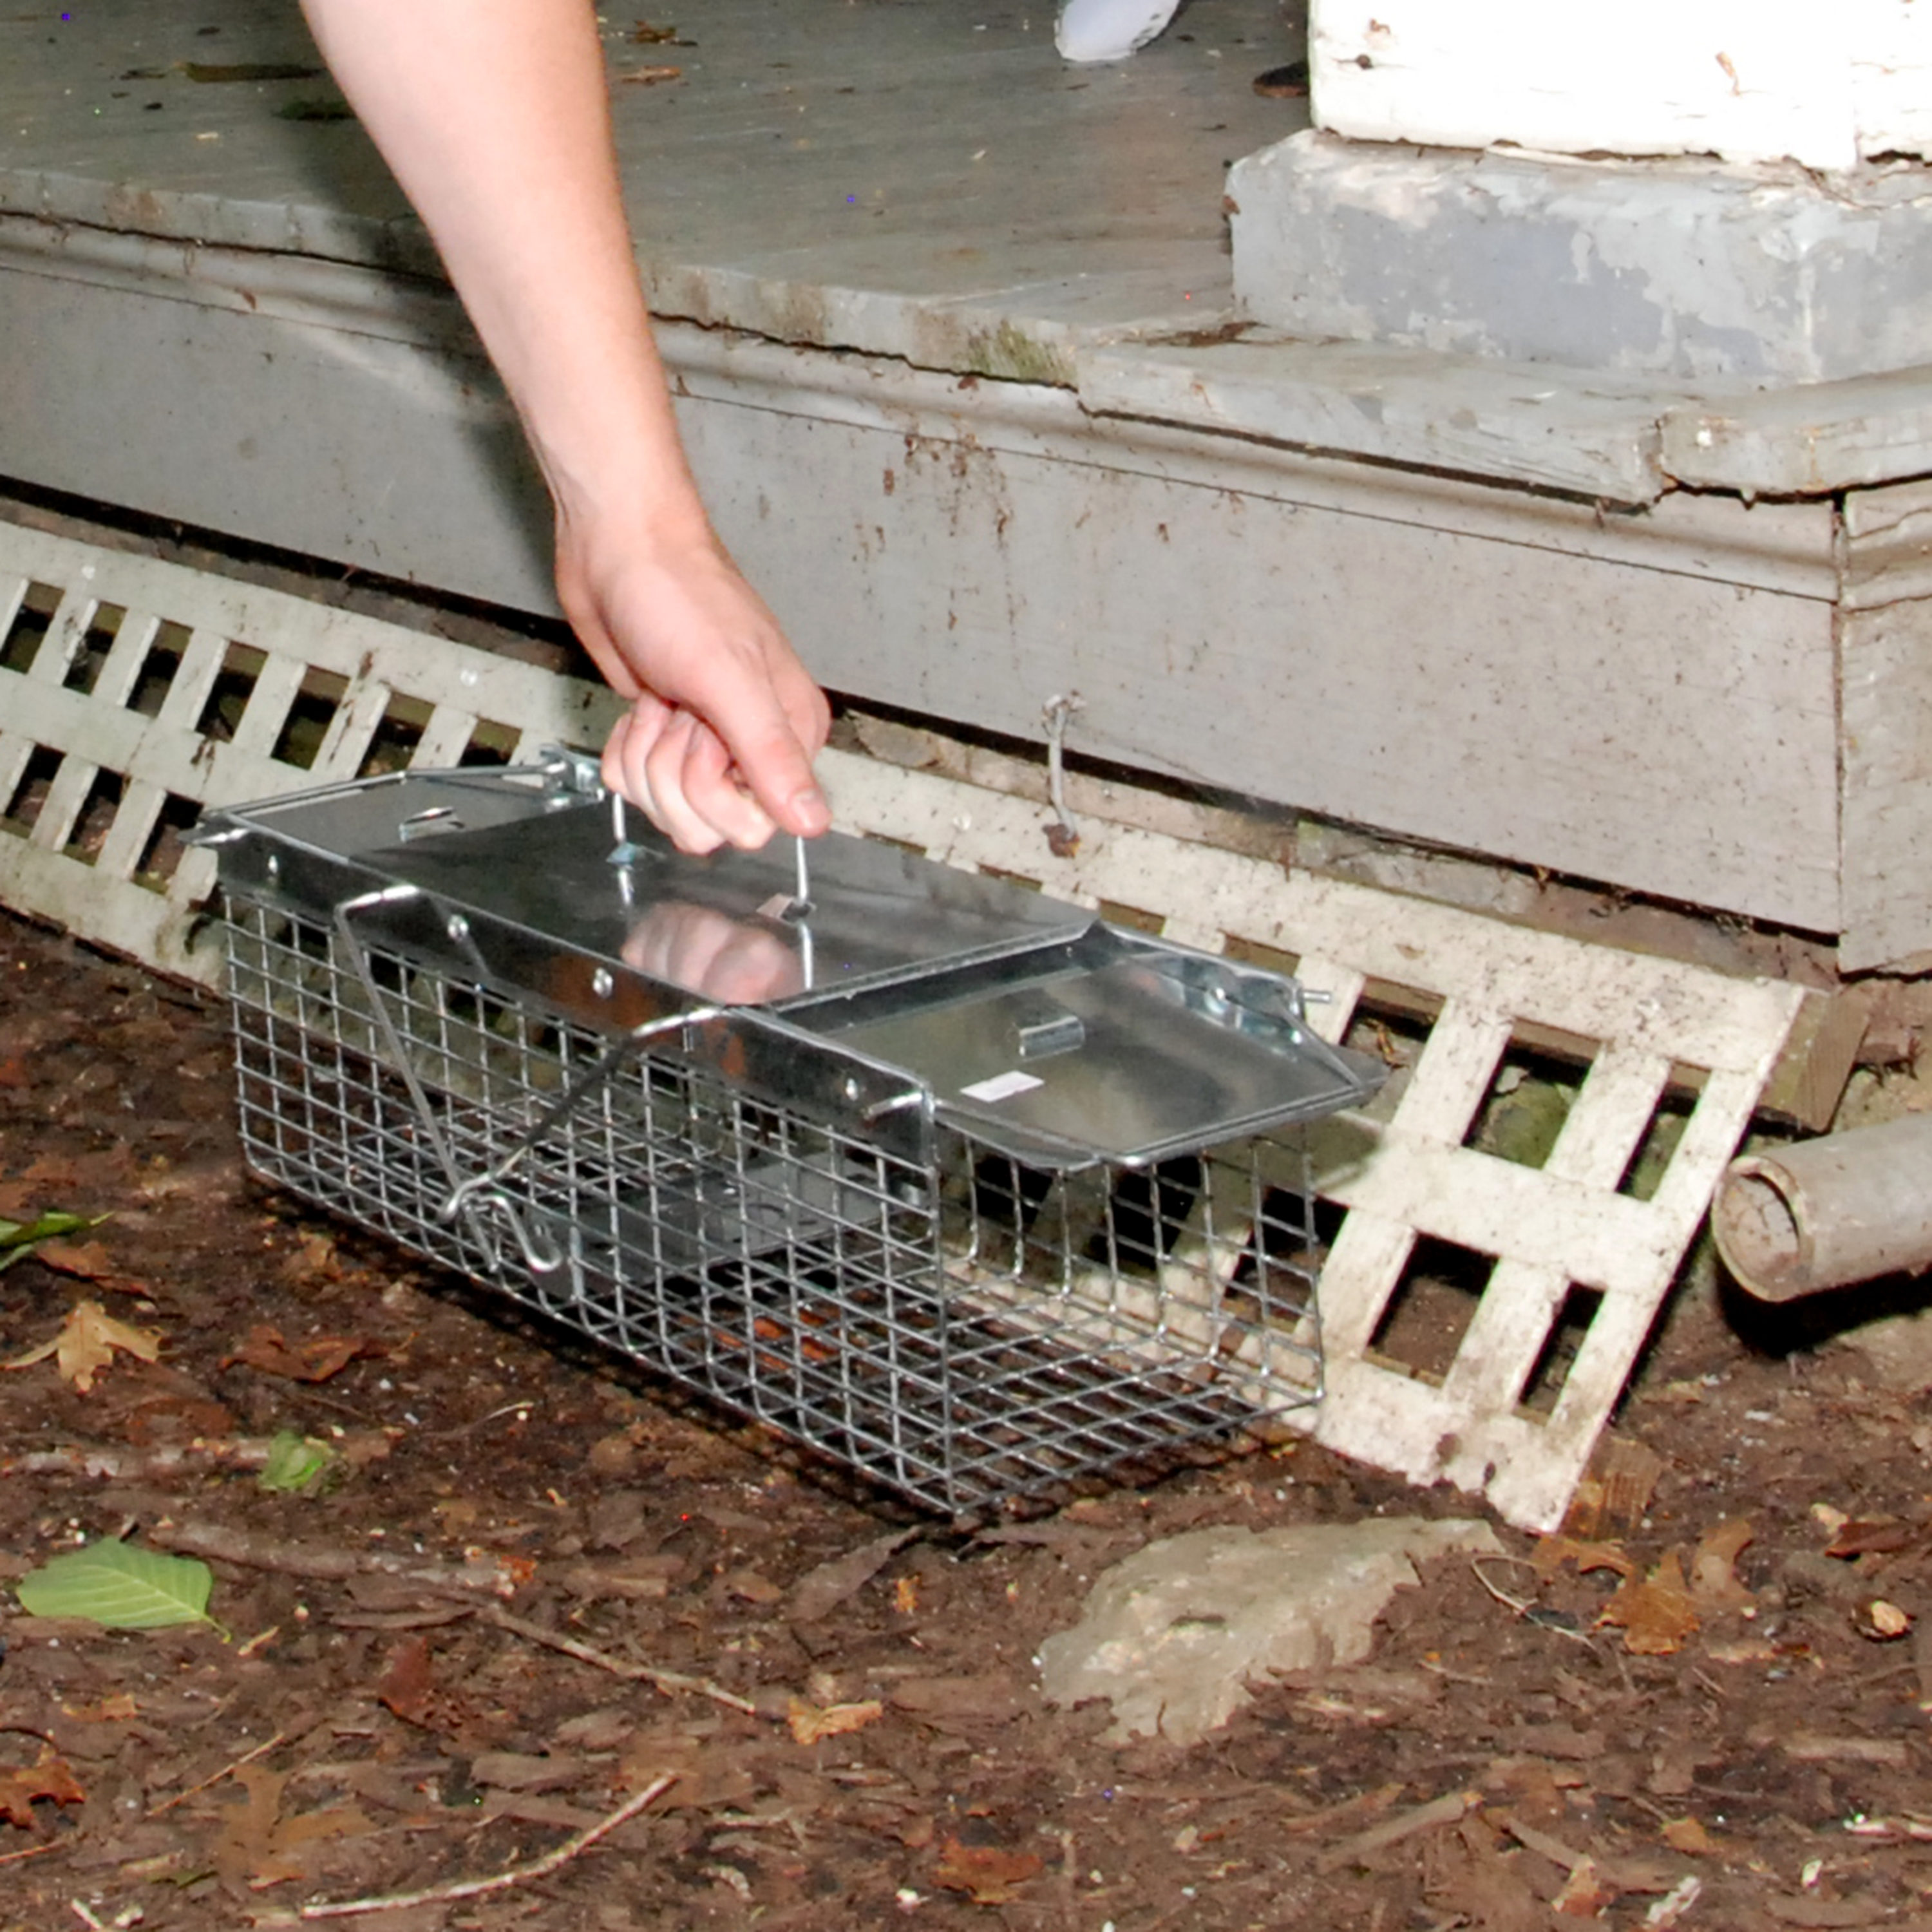 Havahart Trap - Model 1 (18x5x5) For Chipmunks, Rats, Squirrels or  Weasels